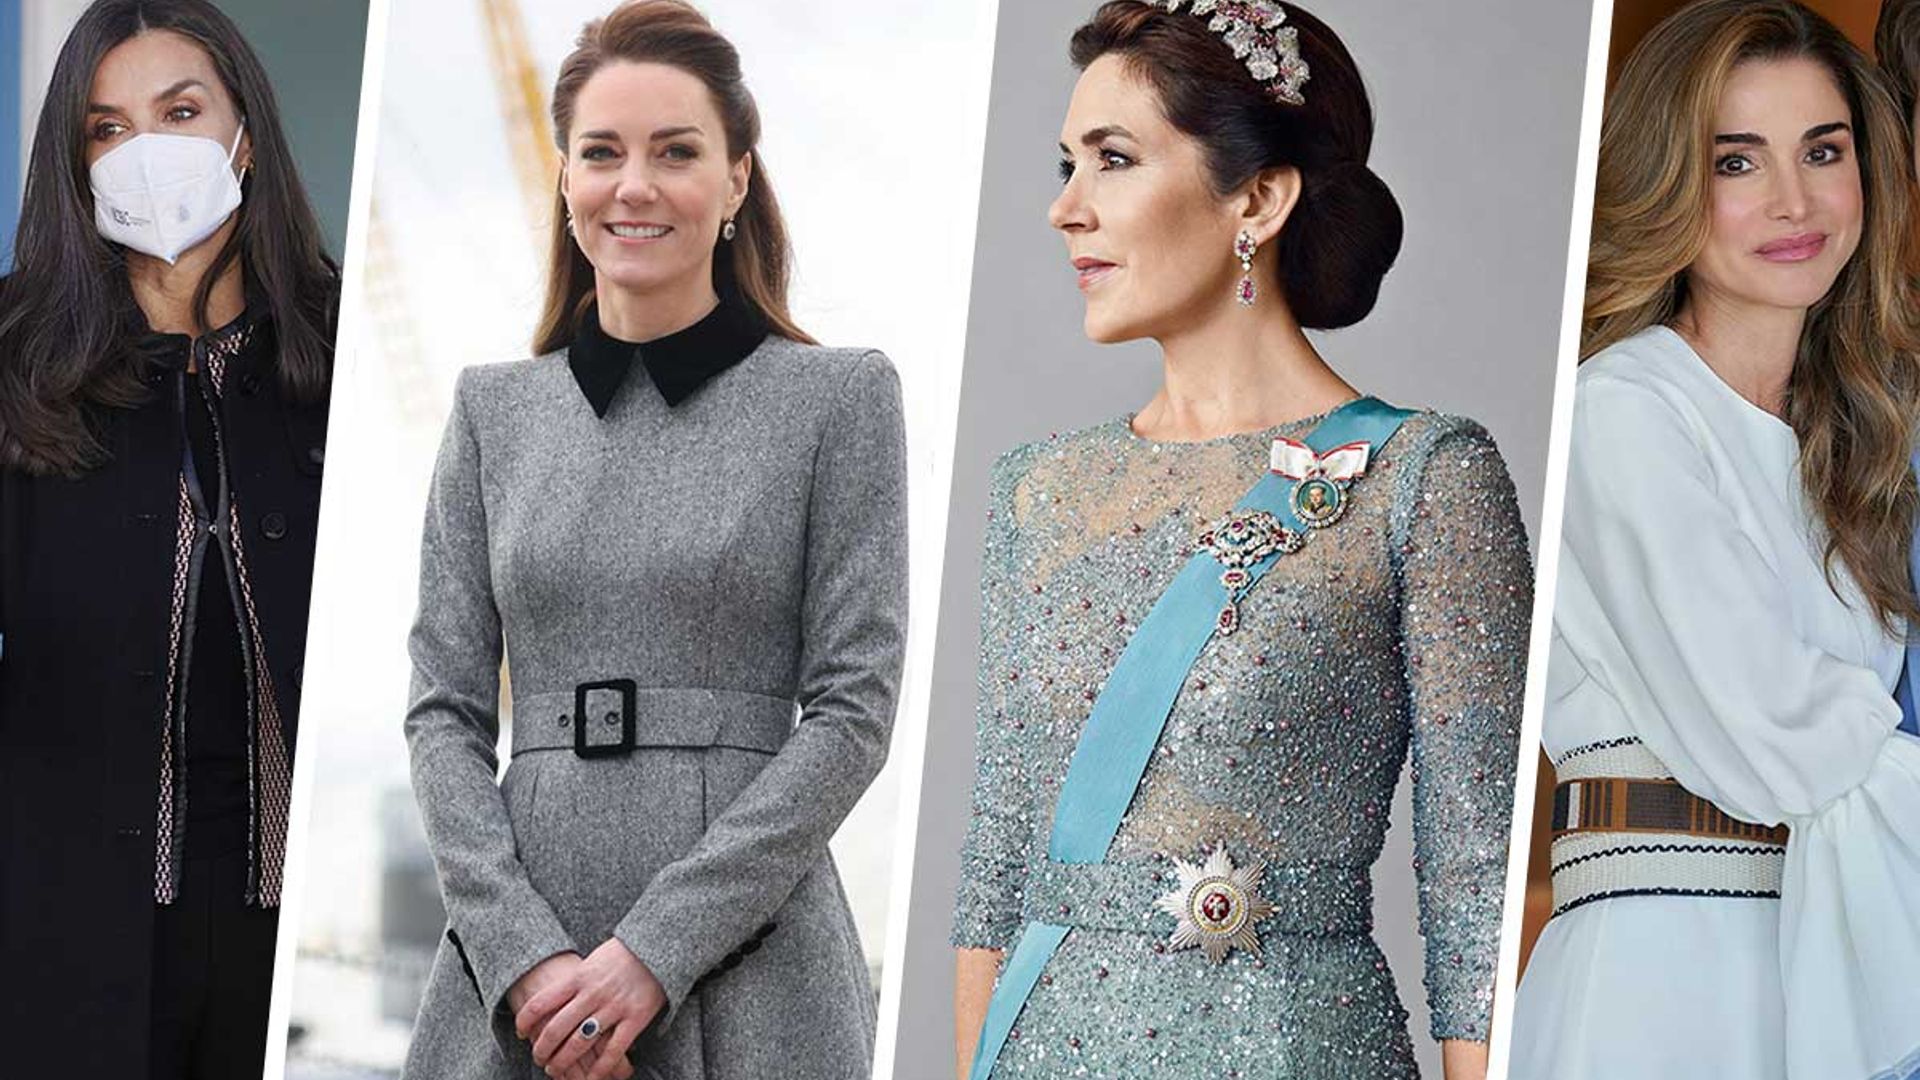 Does Catherine, the Duchess of Cambridge, choose her own daily clothing,  her gowns and any of the jewelry she wears or does she rely on someone  else? What about her children's attire?